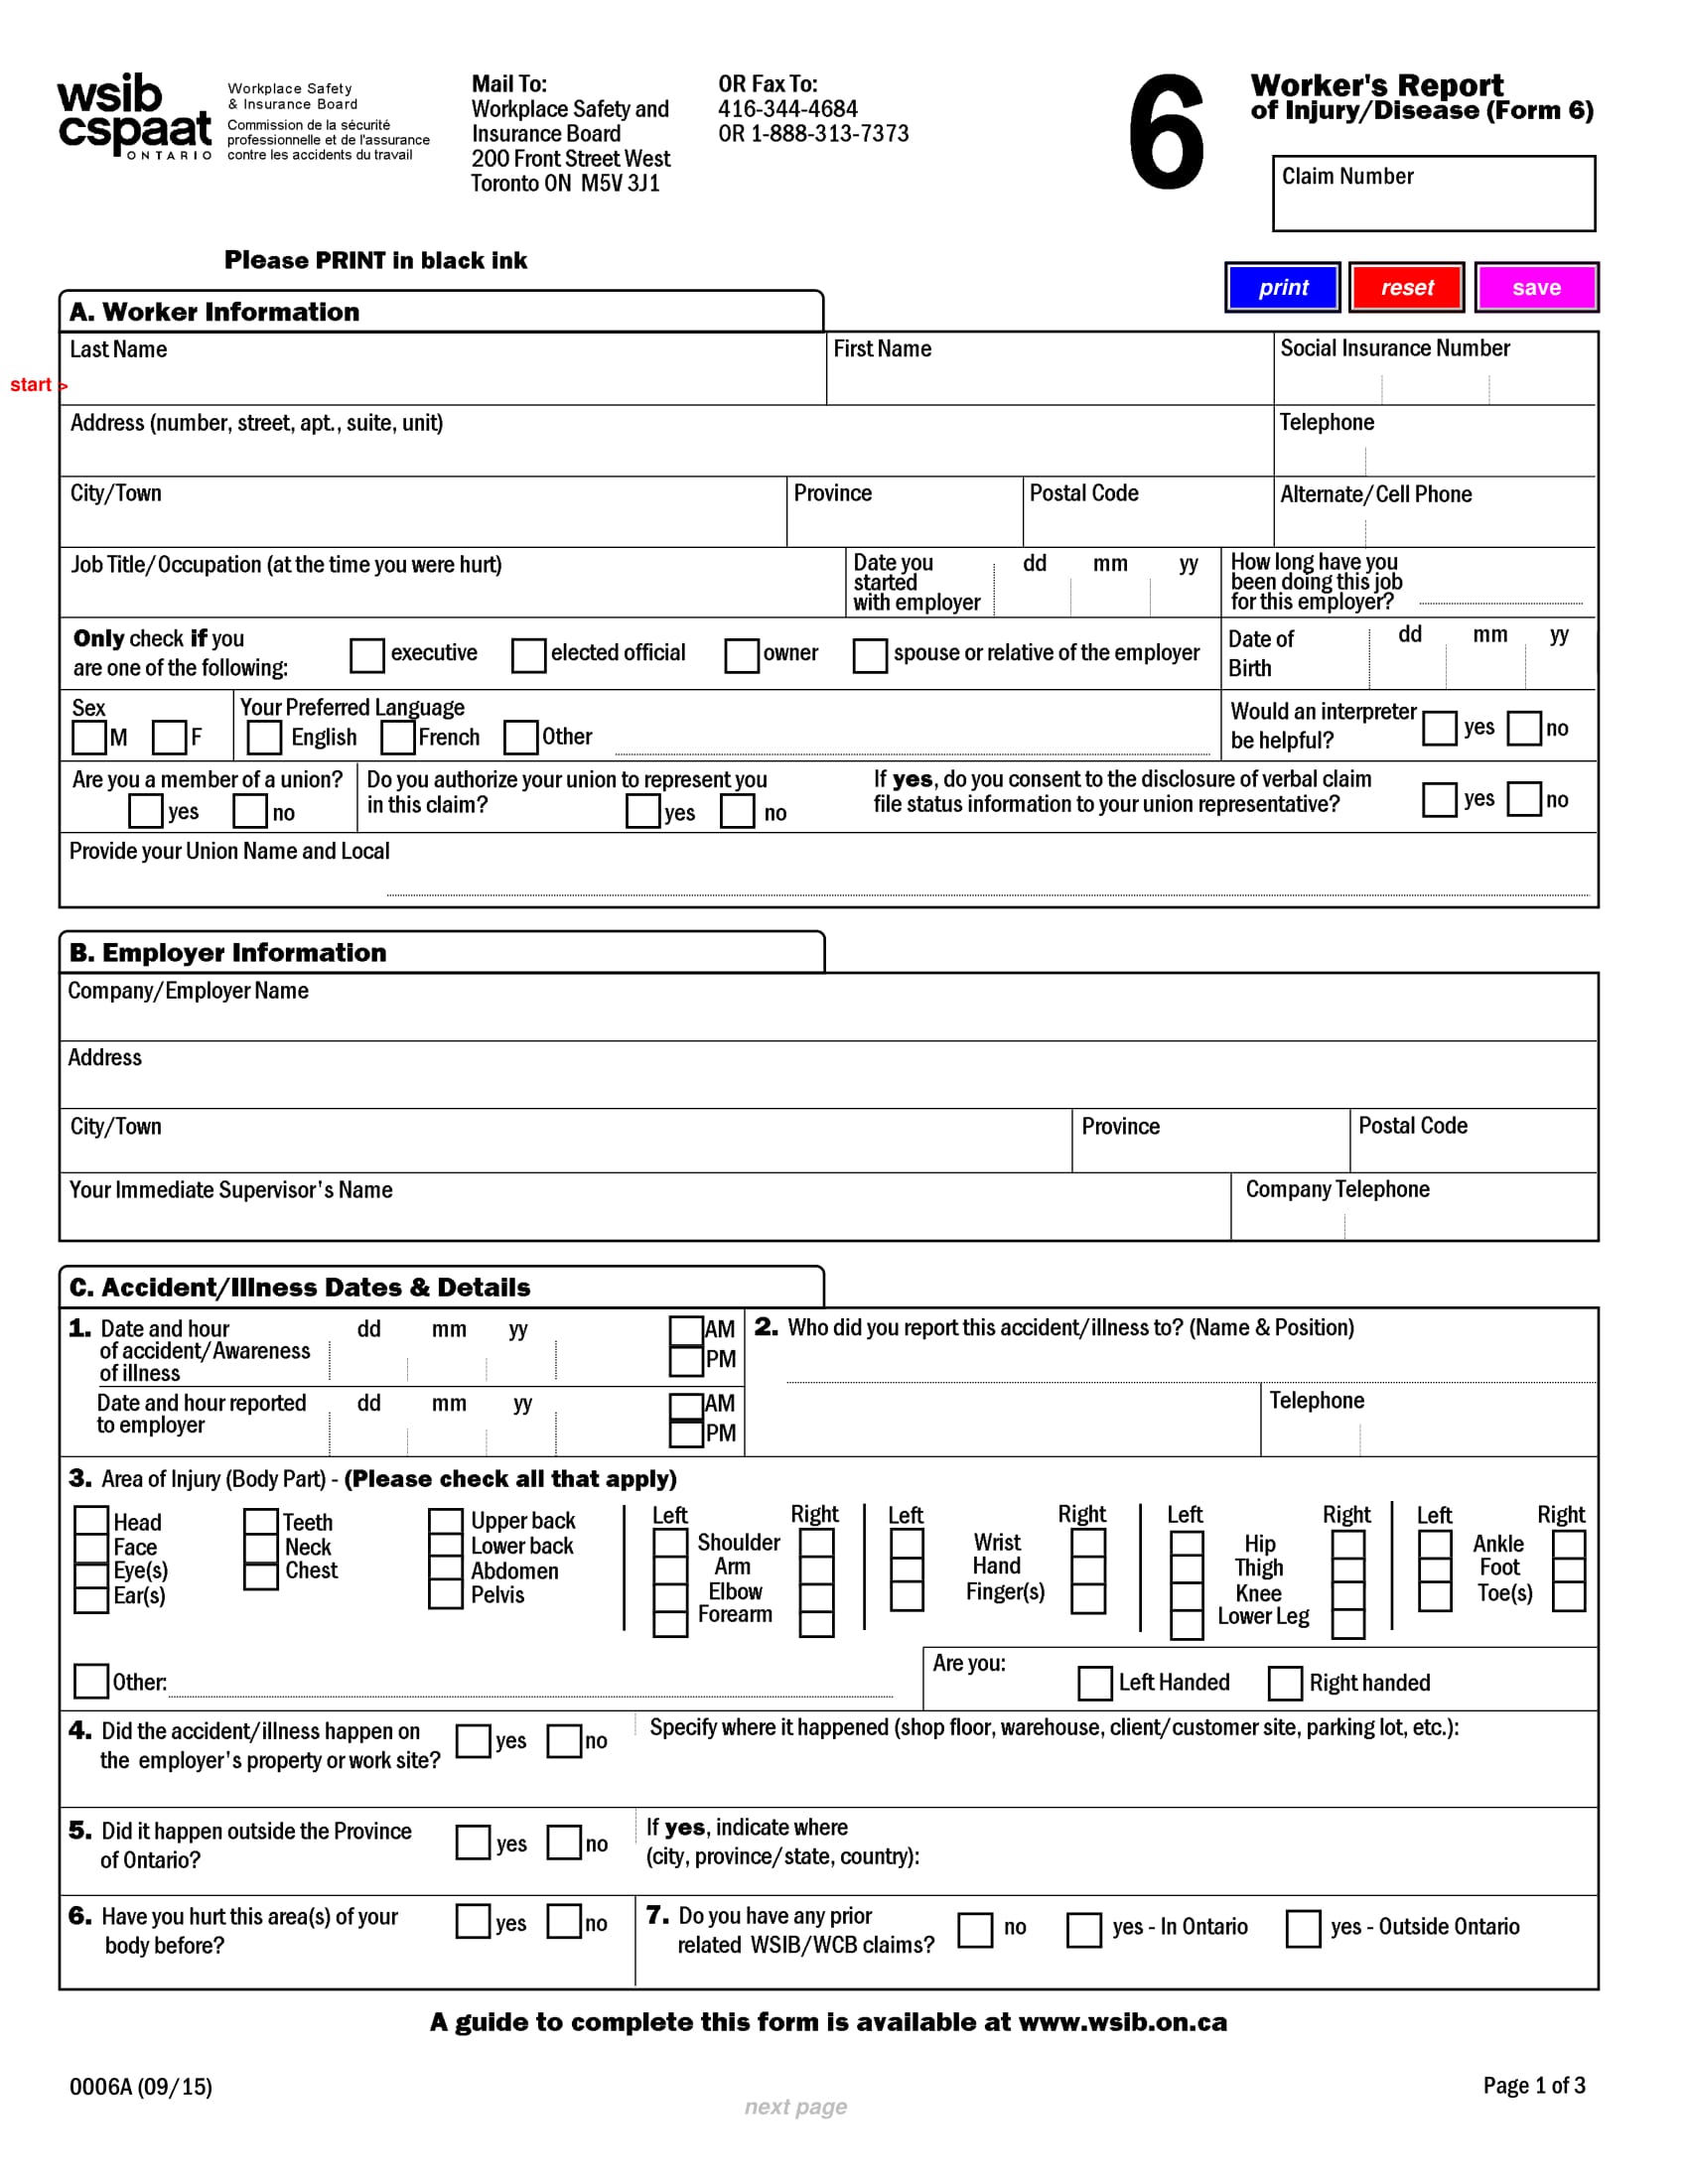 worker’s report of injury or disease form 1